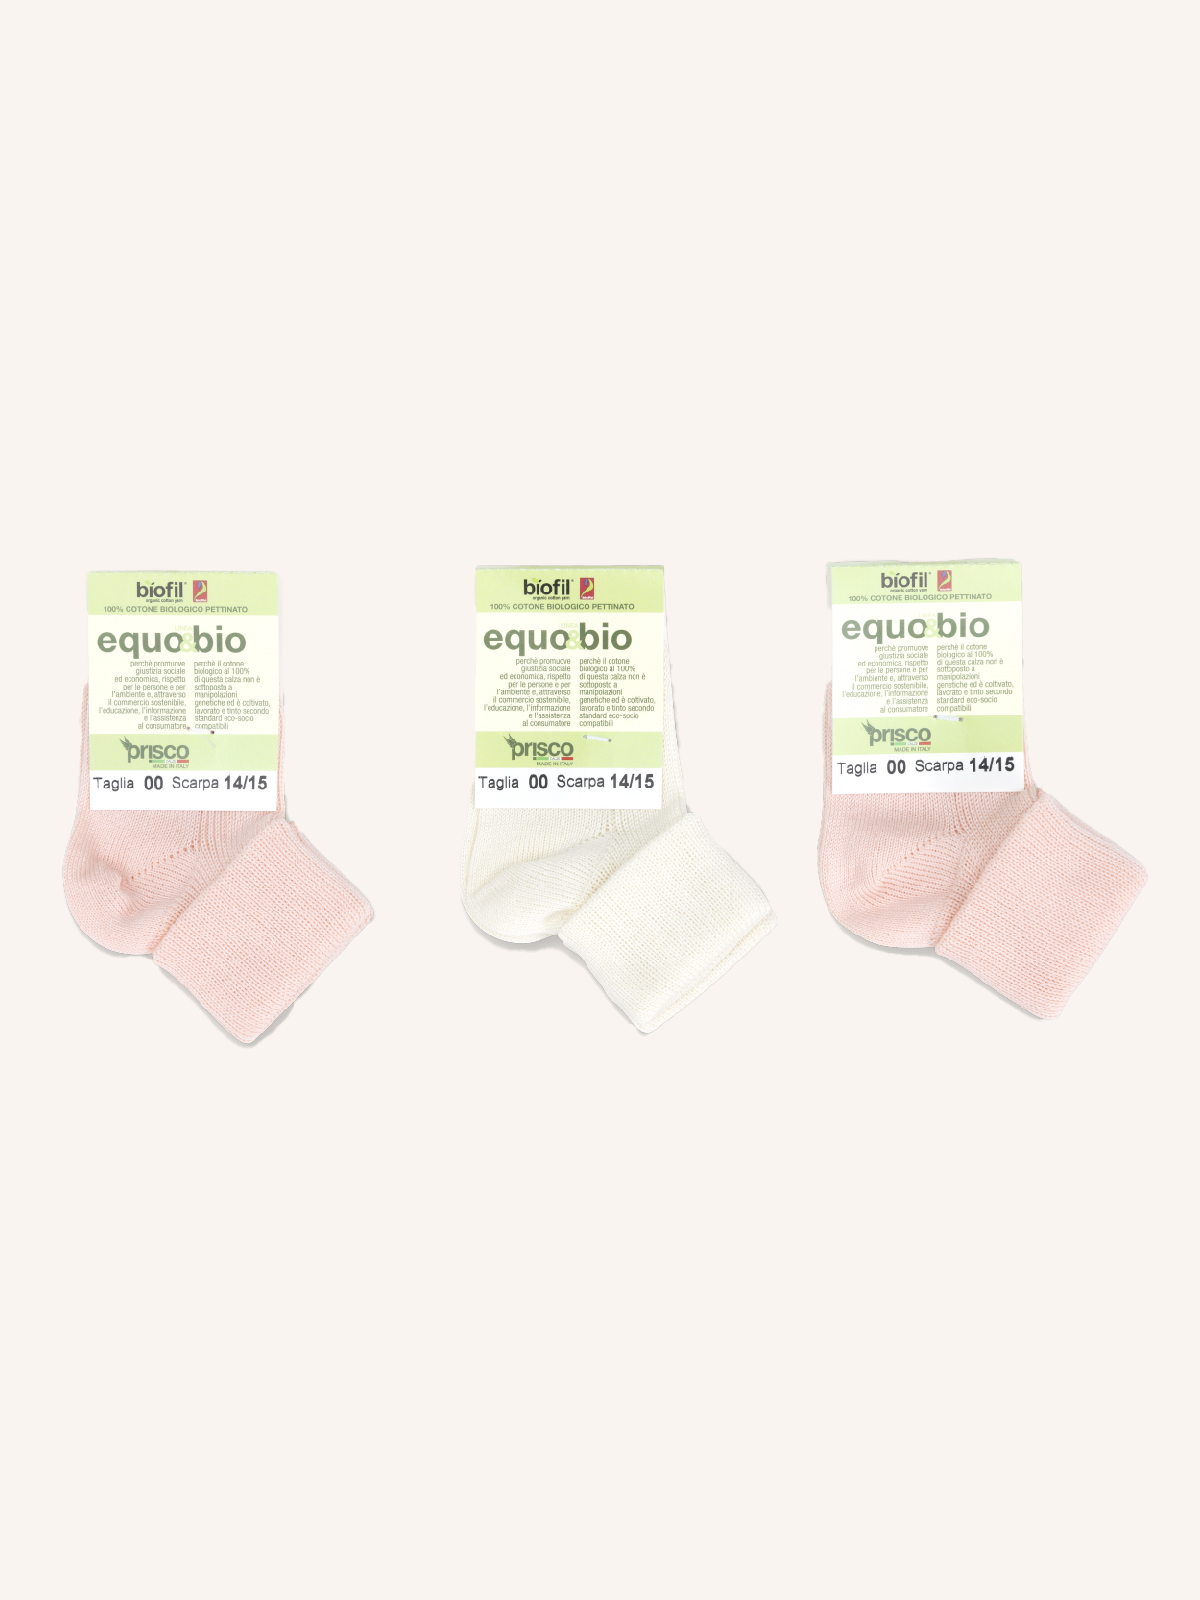 Short Sock with Cuff in Cotton for Newborn | Solid Color | Pack of 6 Pairs | Bio N1